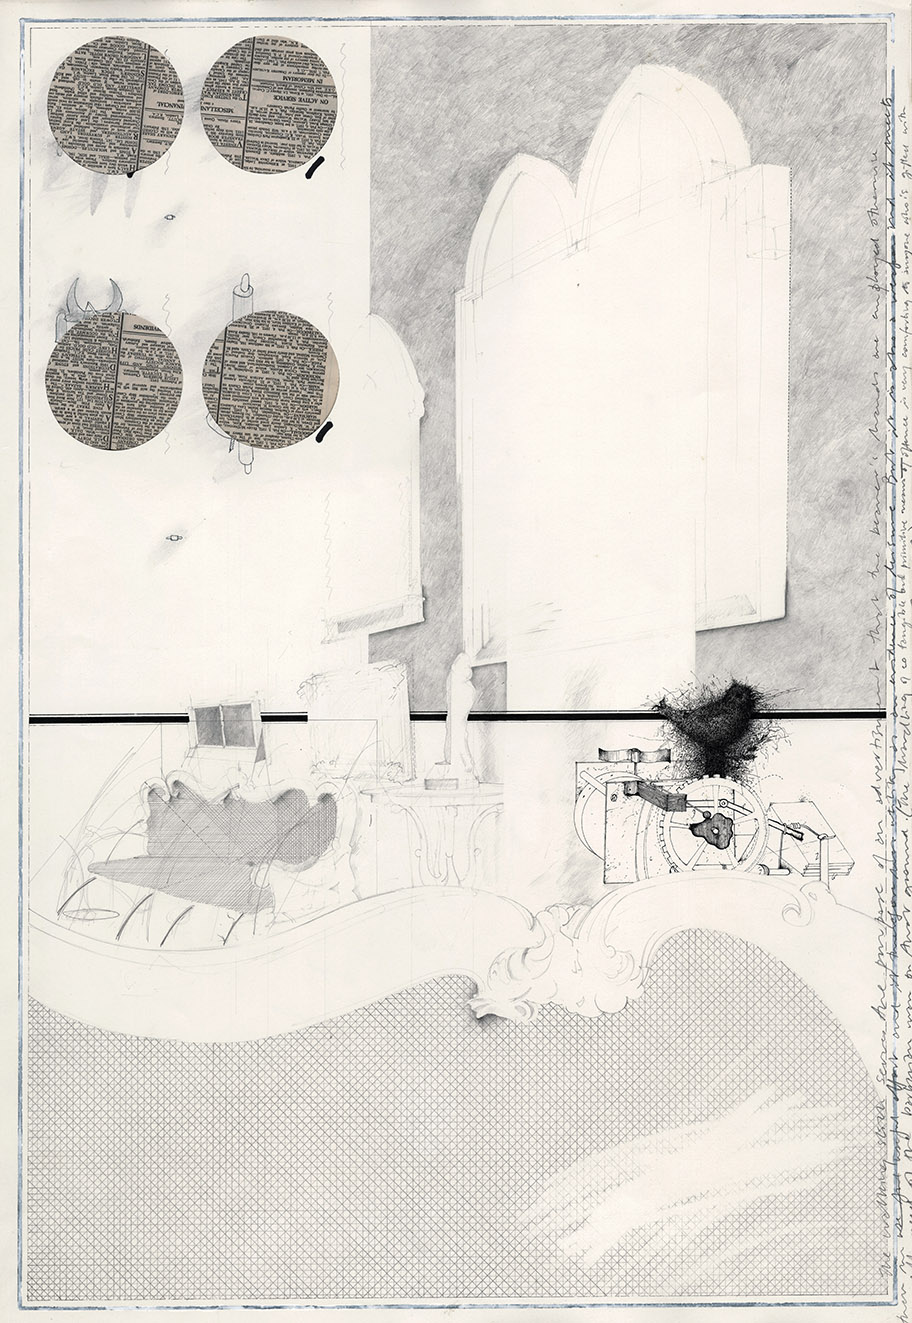 ‘L’oiseau chanteur rococo' (The Rococo Singing Bird’) 250x580mm . pencil, ink and collage . 1983